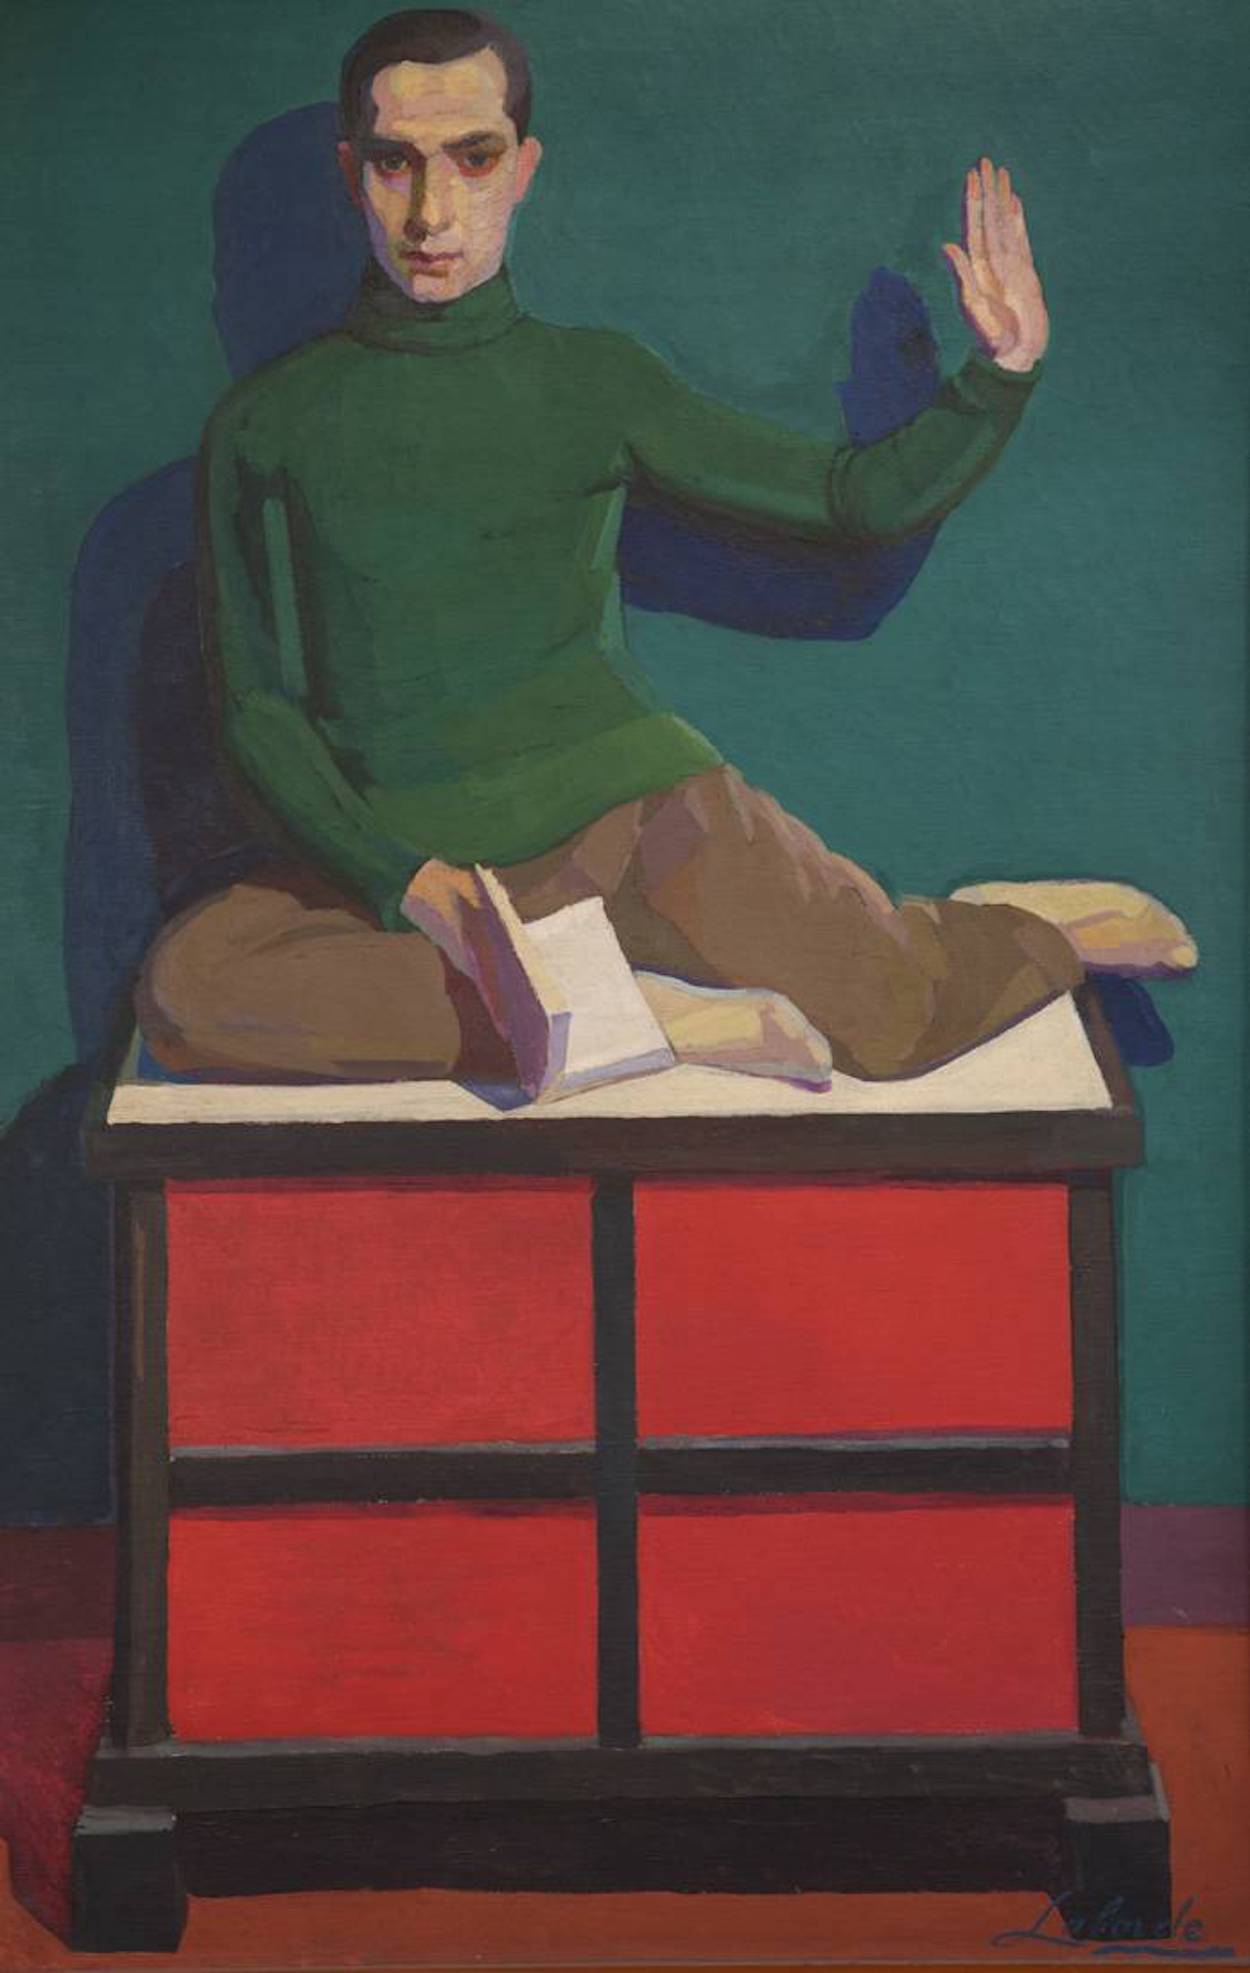 Luis E. Pombo by Guillermo Laborde - omstreeks 1928 - 200 x 250 cm 